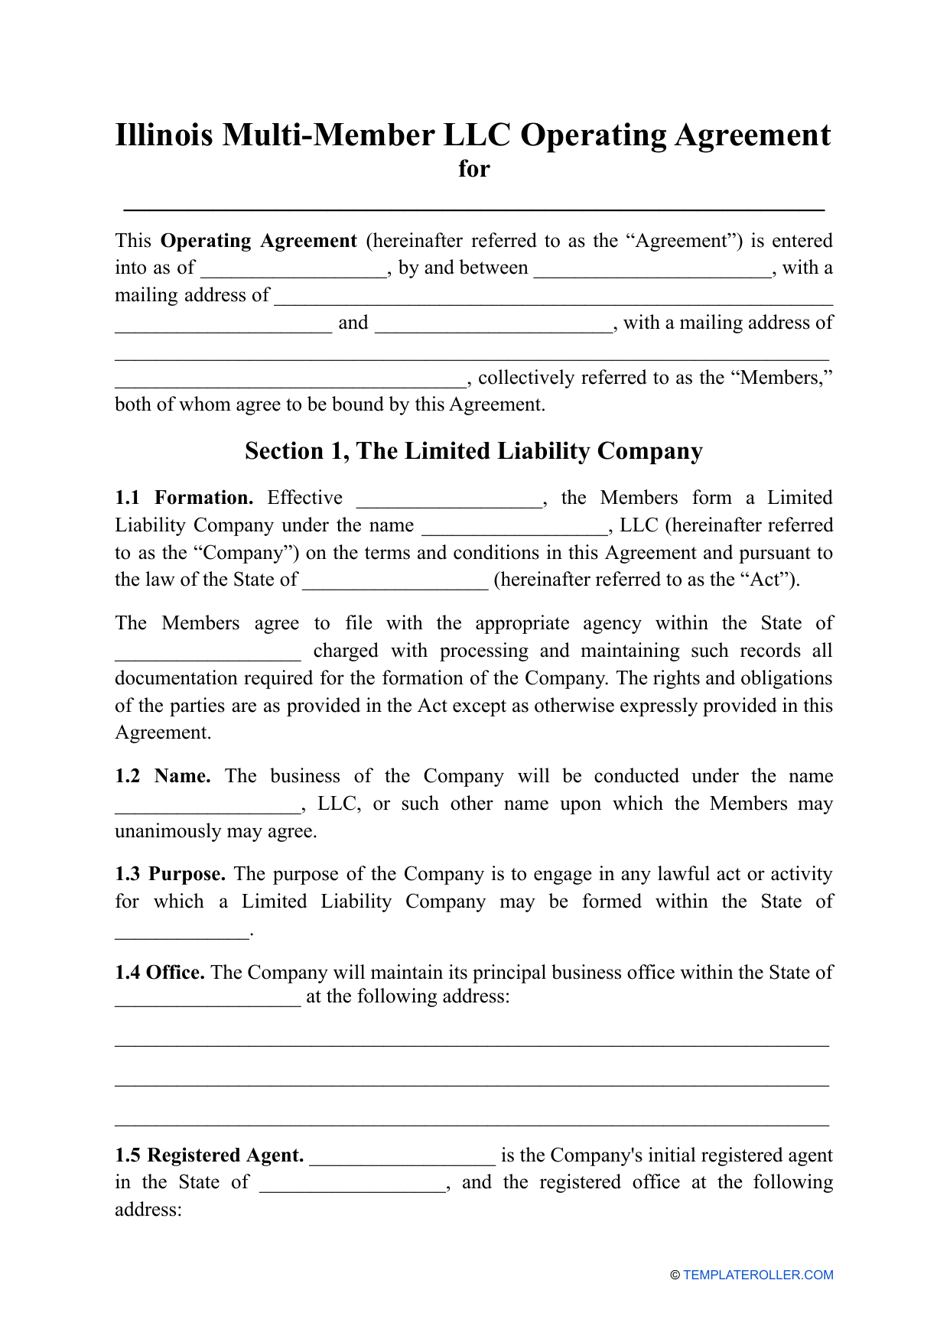 Multi-Member LLC Operating Agreement Template - Illinois, Page 1